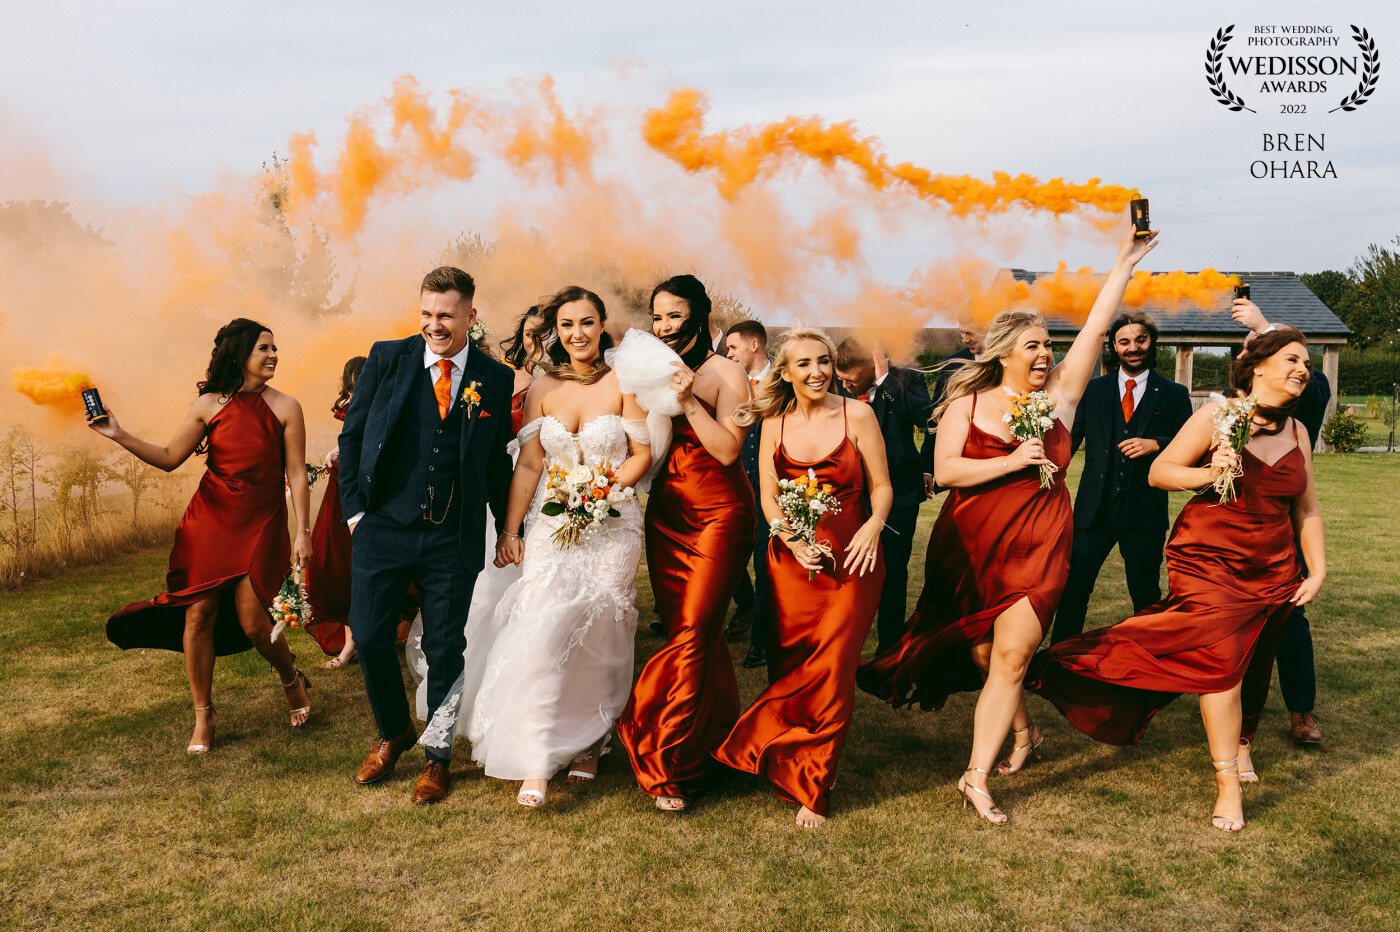 Taken at the wedding of Tia and Jake. The wedding was held at one of my favourite venues, The Beverley Barn. With smoke grenades I just never know how it will turn out, thankfully this wedding party were up for anything! We ended up practically running around a field. Orange was the colour theme for the wedding, so the orange grenades were quite appropriate.